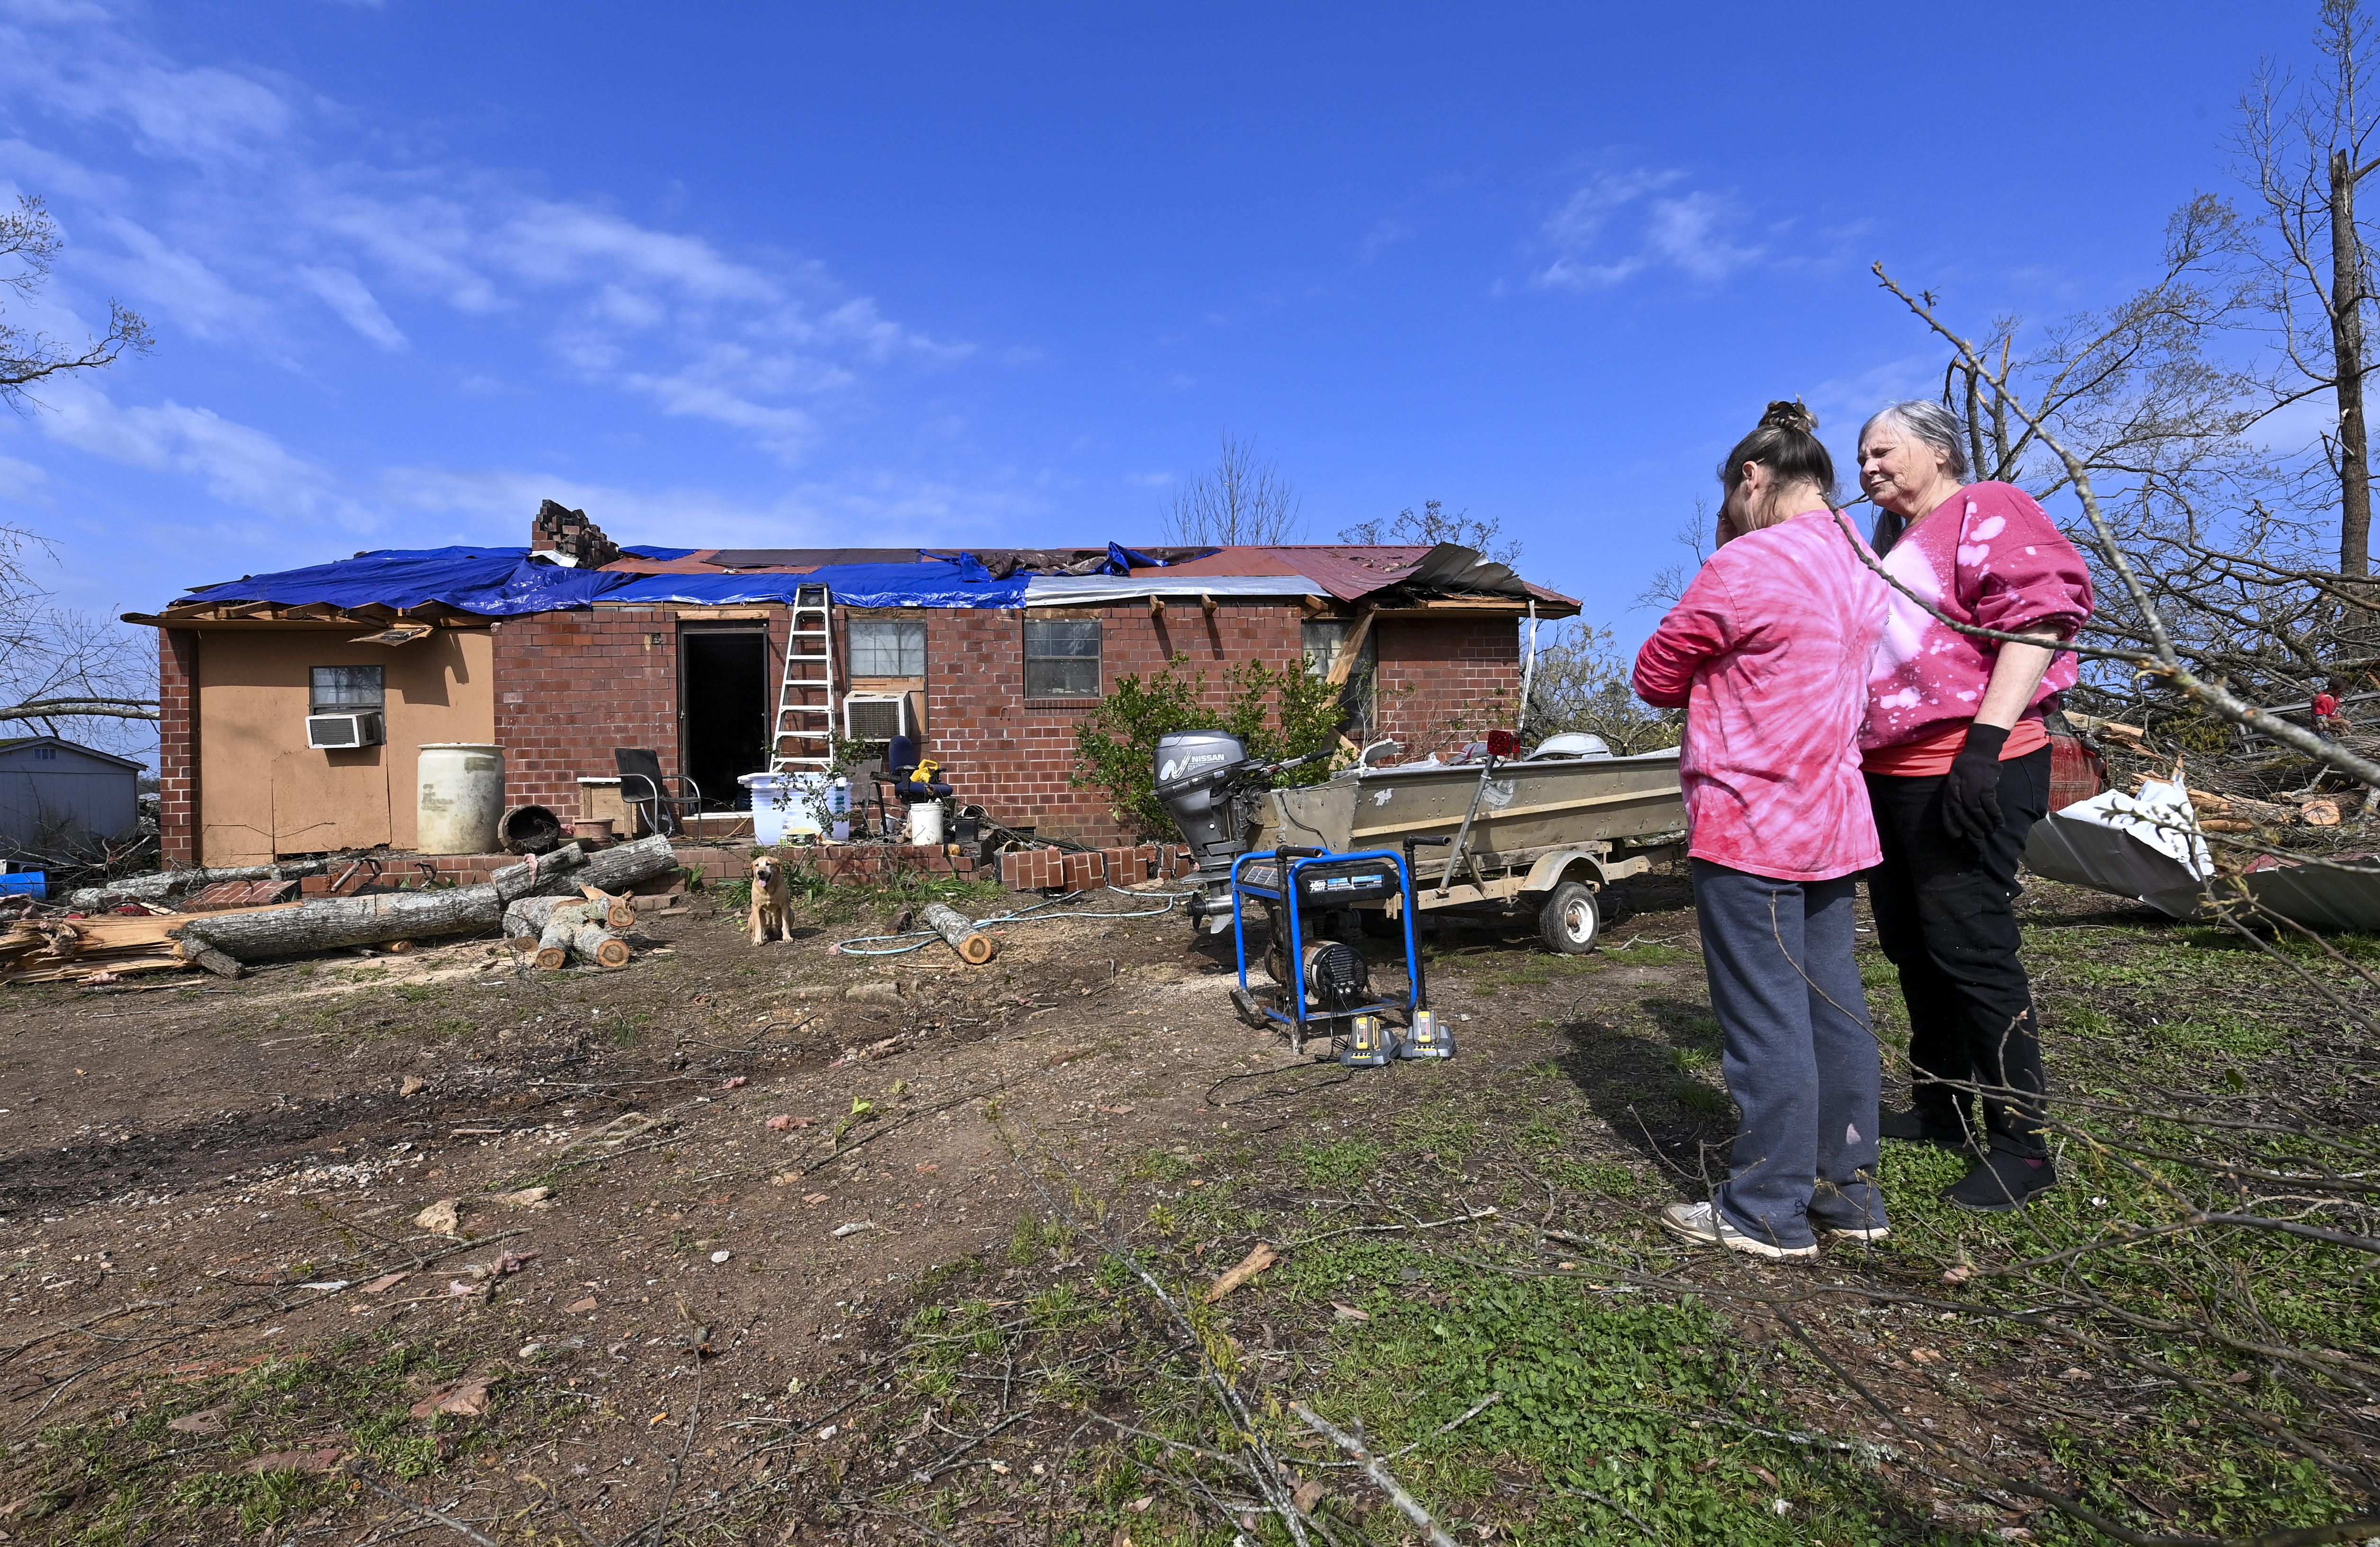 Photo of two people standing outside a destroyed home, one comforting the other